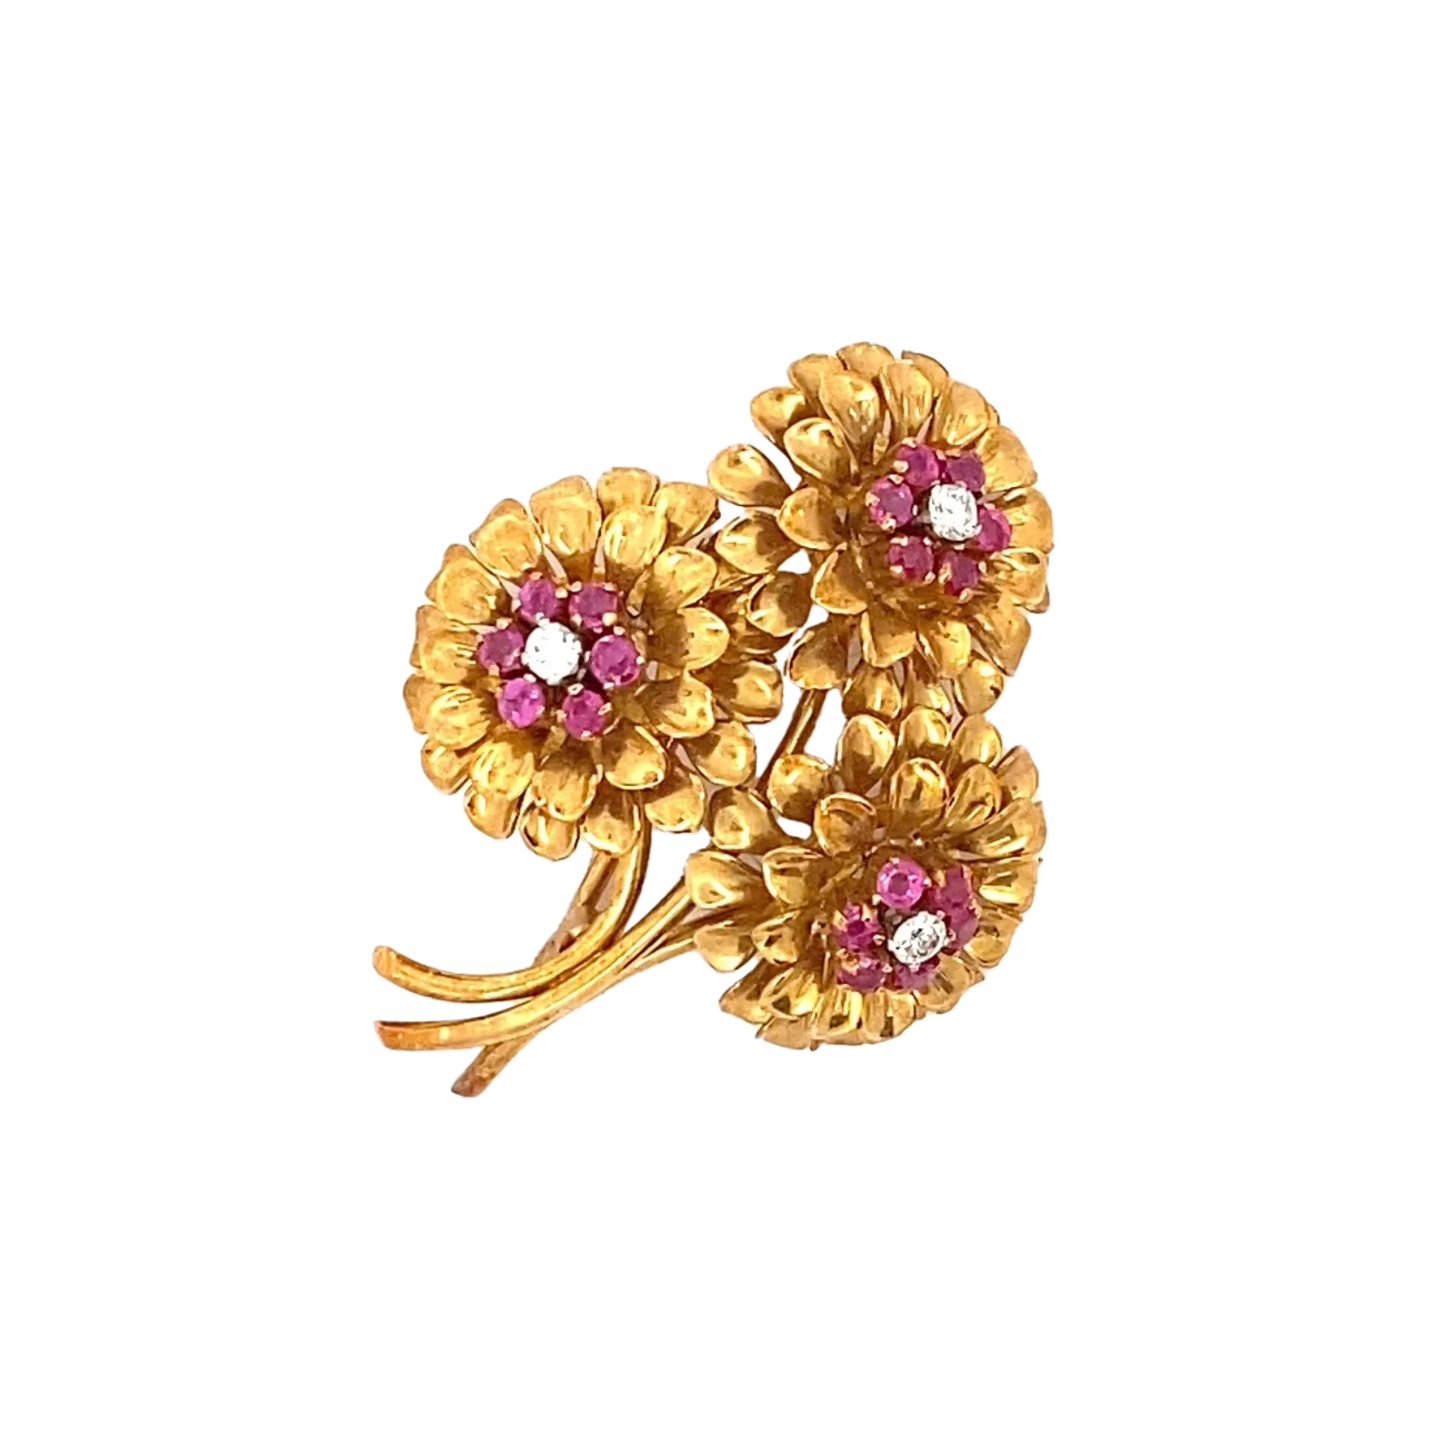 Tiffany & Co. 1960s 18KT Yellow Gold Ruby & Diamond Flower Brooch front view